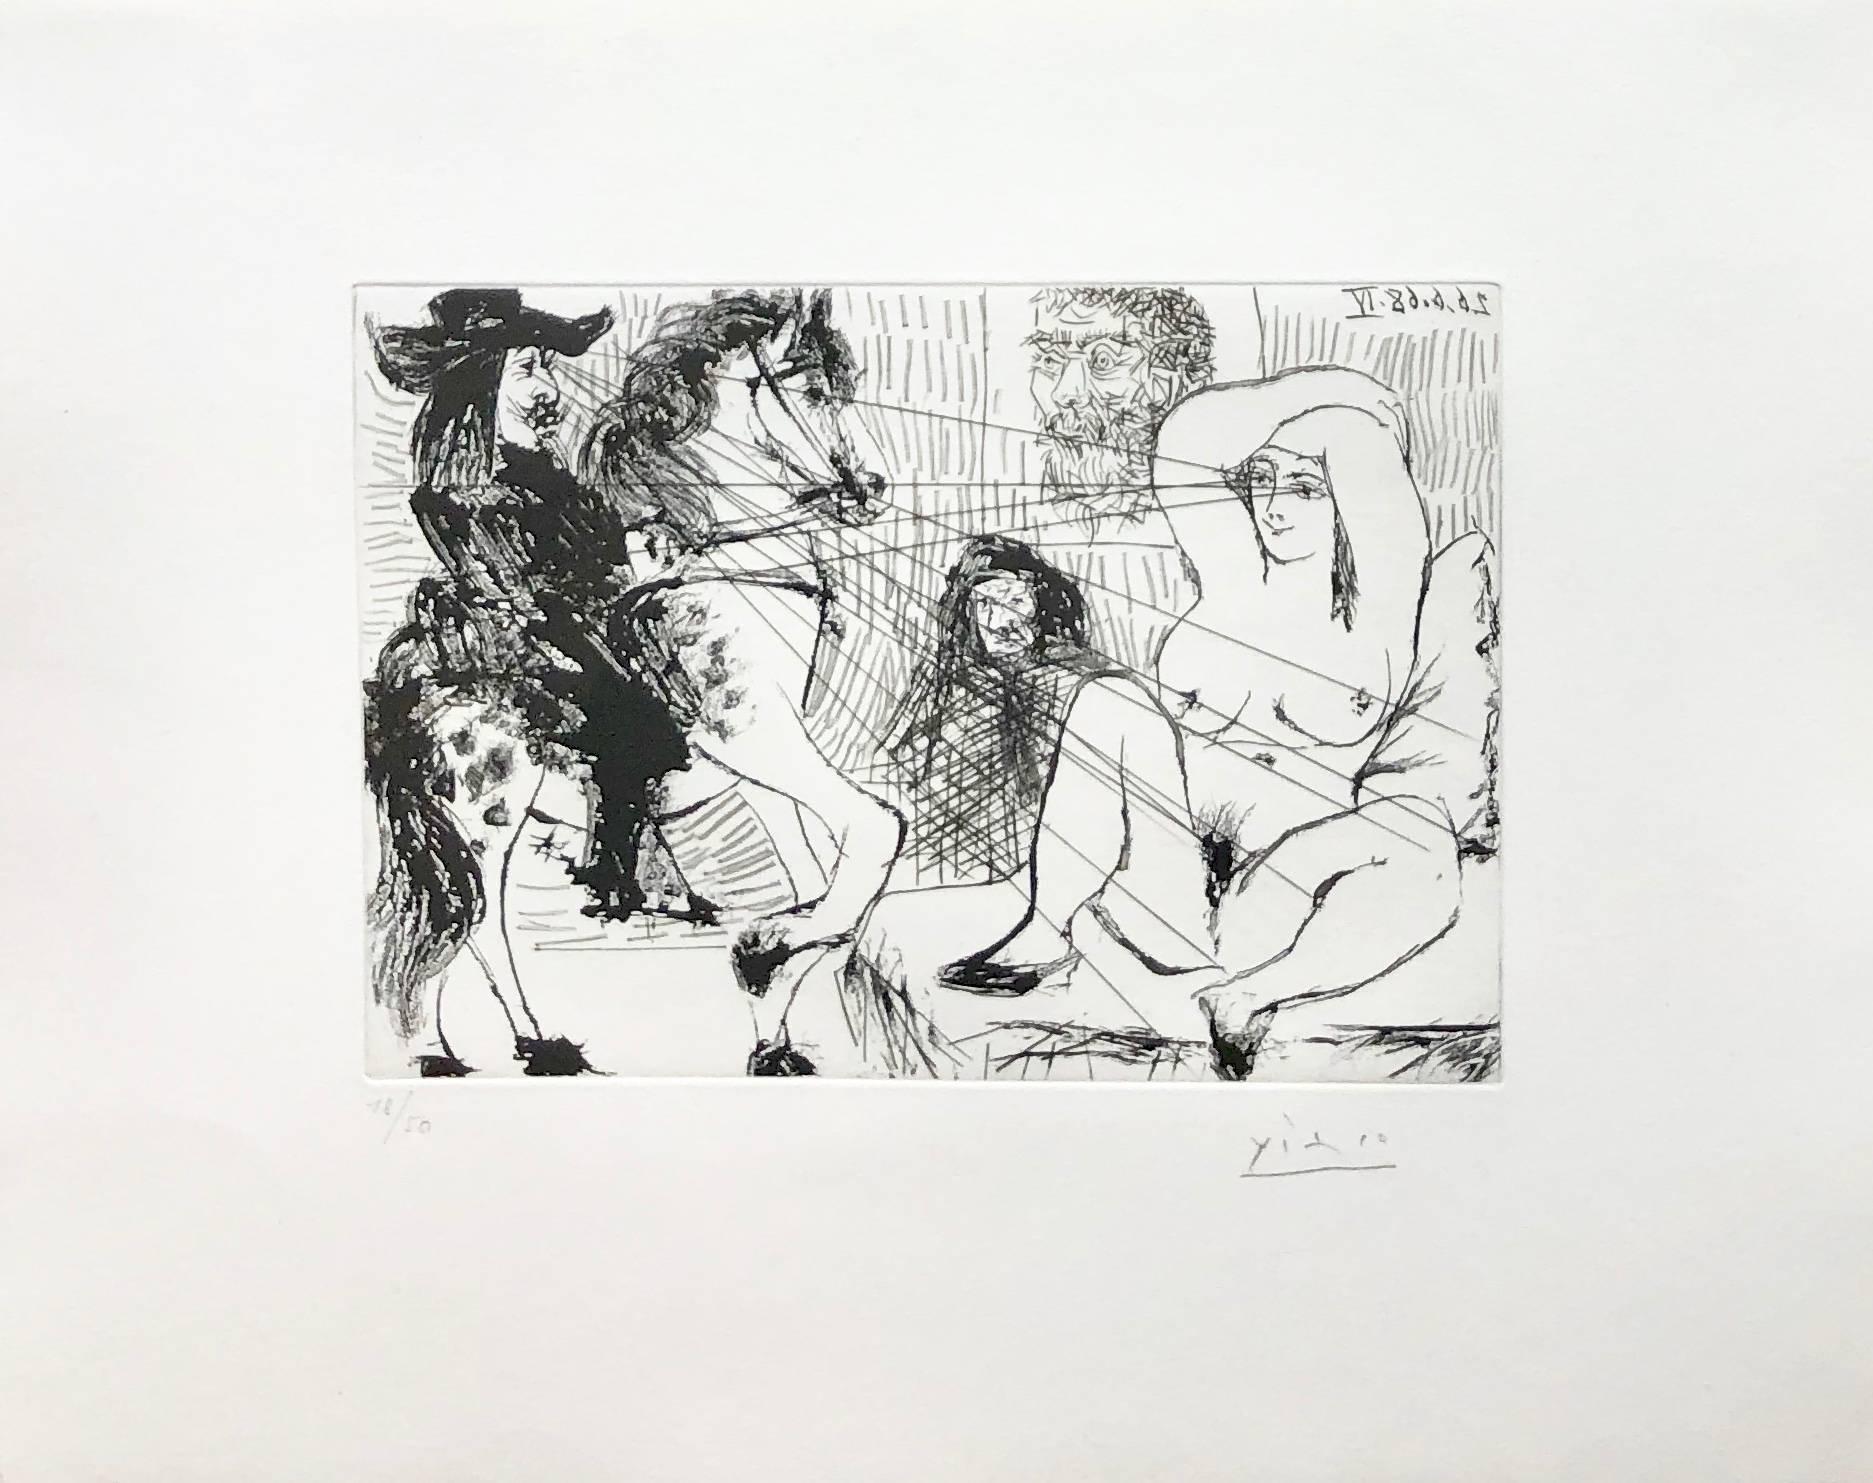 Pablo Picasso, Exchange de Regards from 347 Series, aquatint and drypoint